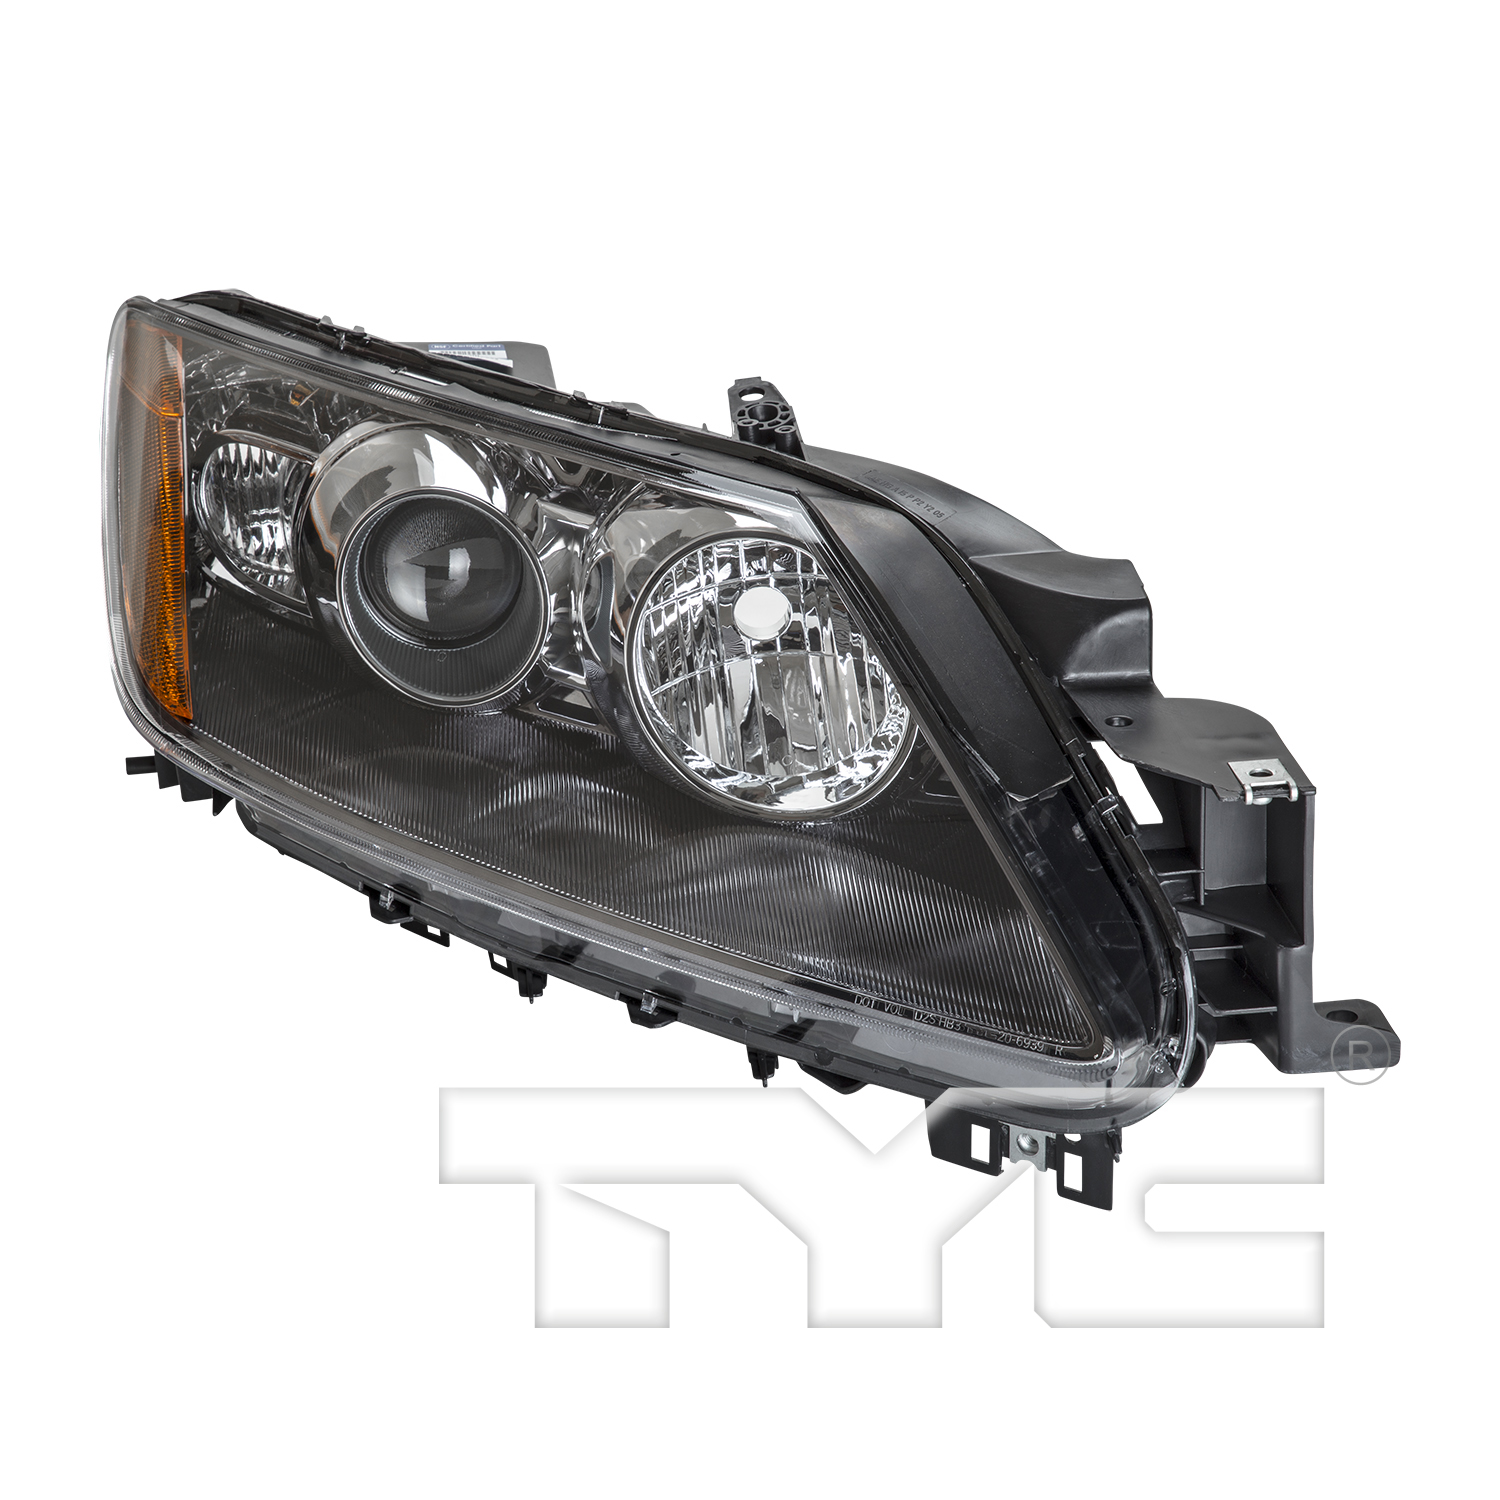 Aftermarket HEADLIGHTS for MAZDA - CX-7, CX-7,07-09,RT Headlamp assy composite